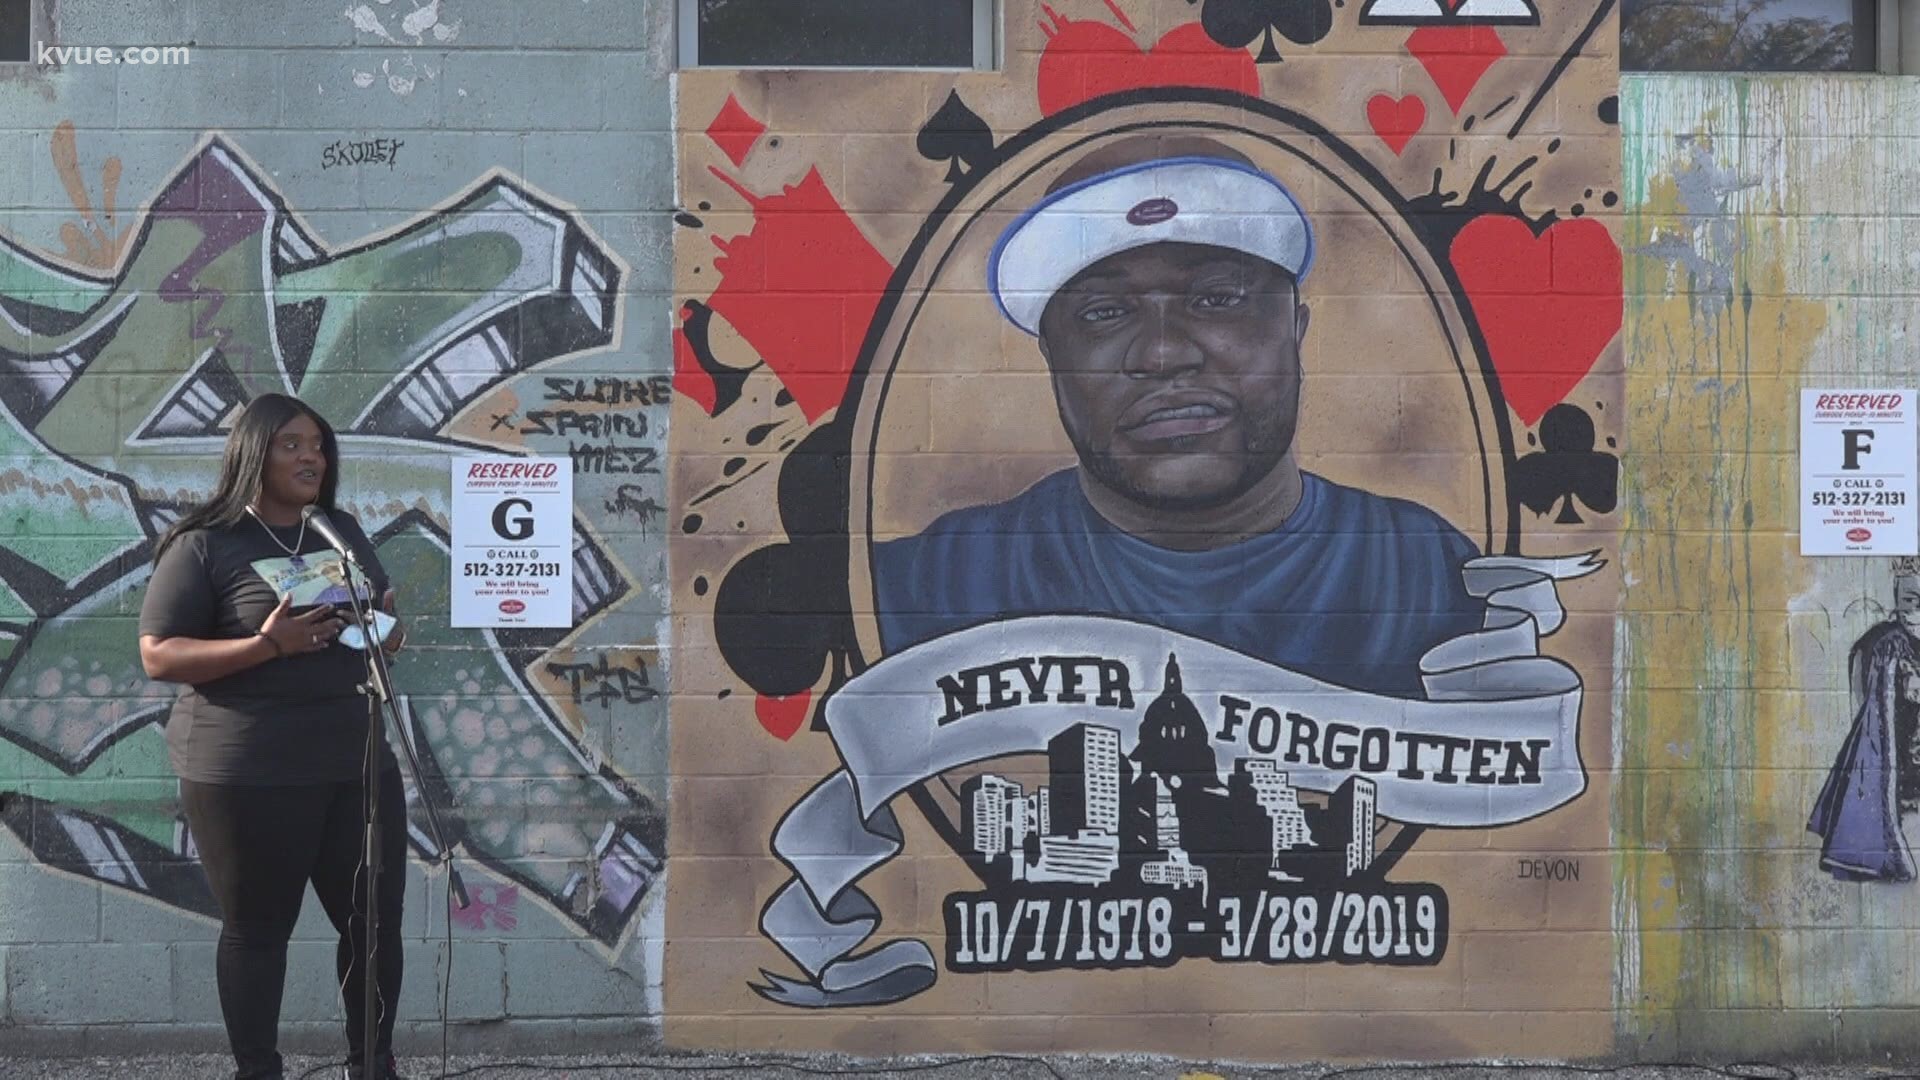 A Javier Ambler memorial mural was unveiled in Austin on Saturday. His family said they are seeking justice after the in-custody death.